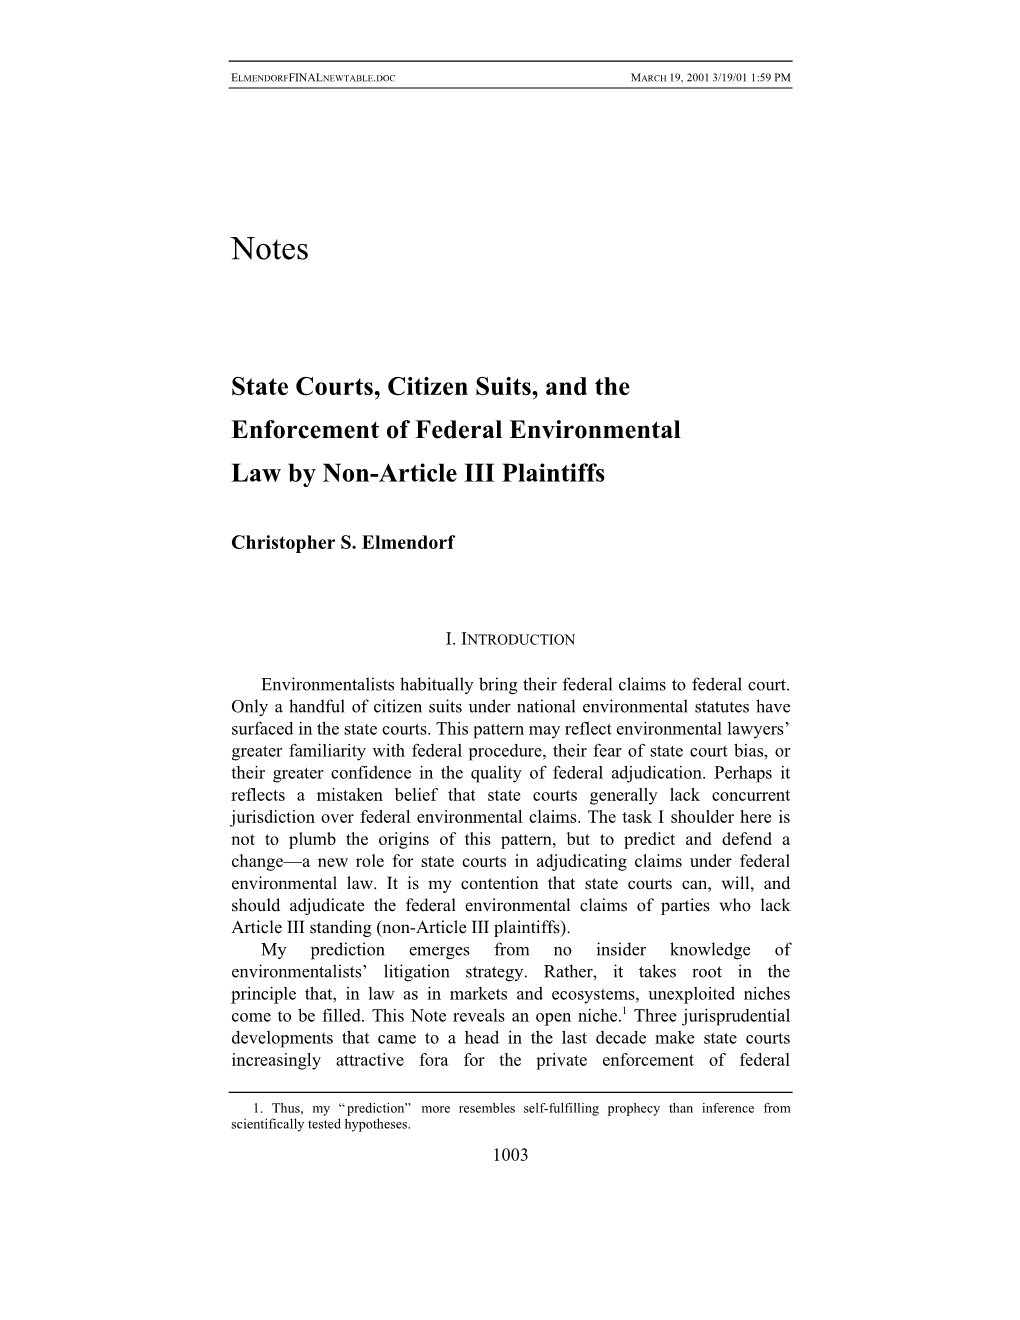 State Courts, Citizen Suits, and the Enforcement of Federal Environmental Law by Non-Article III Plaintiffs